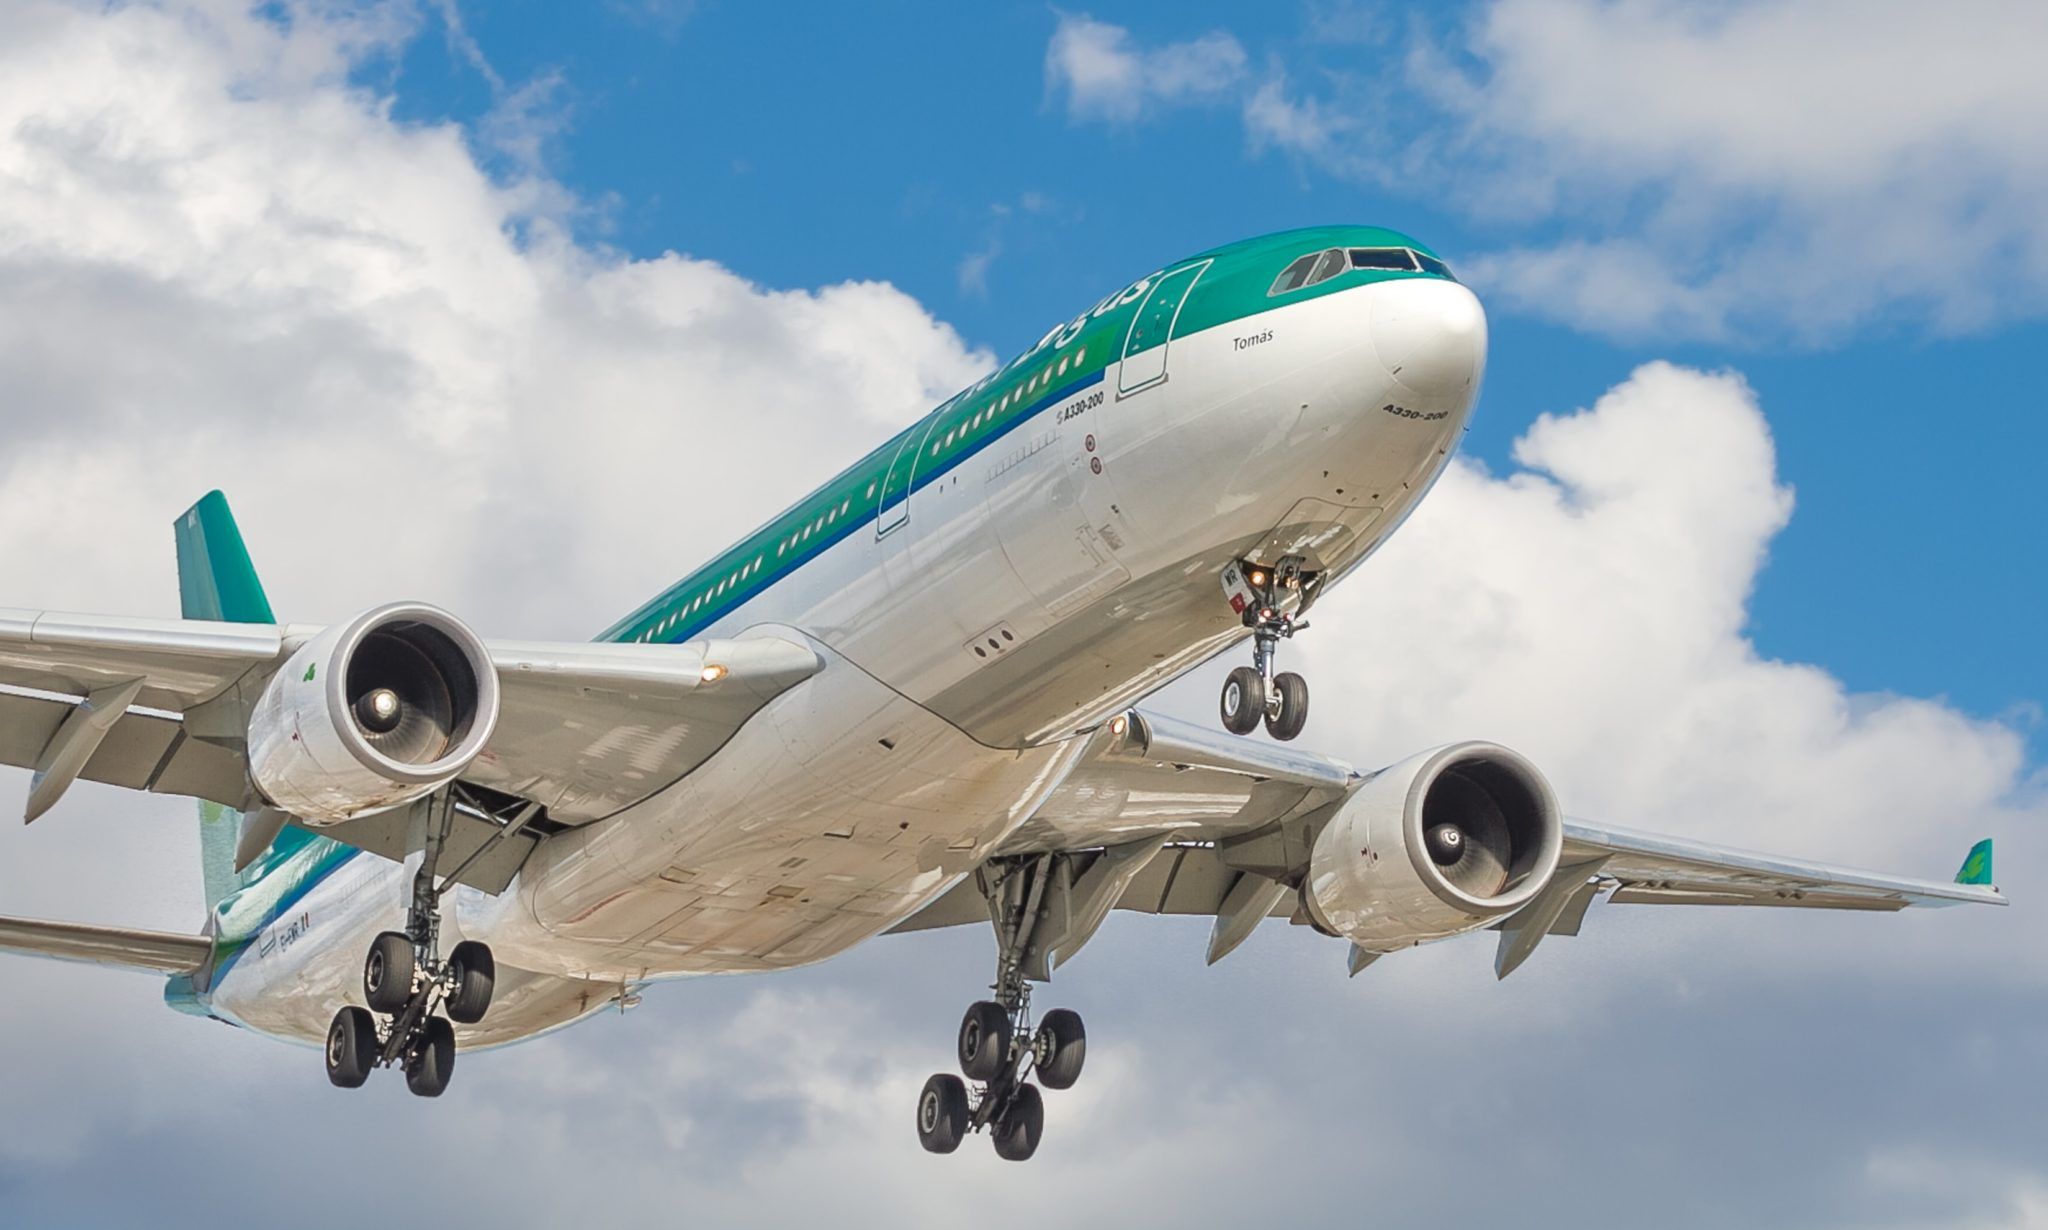 Fly from Europe to North America from €150 with the Aer Lingus sale